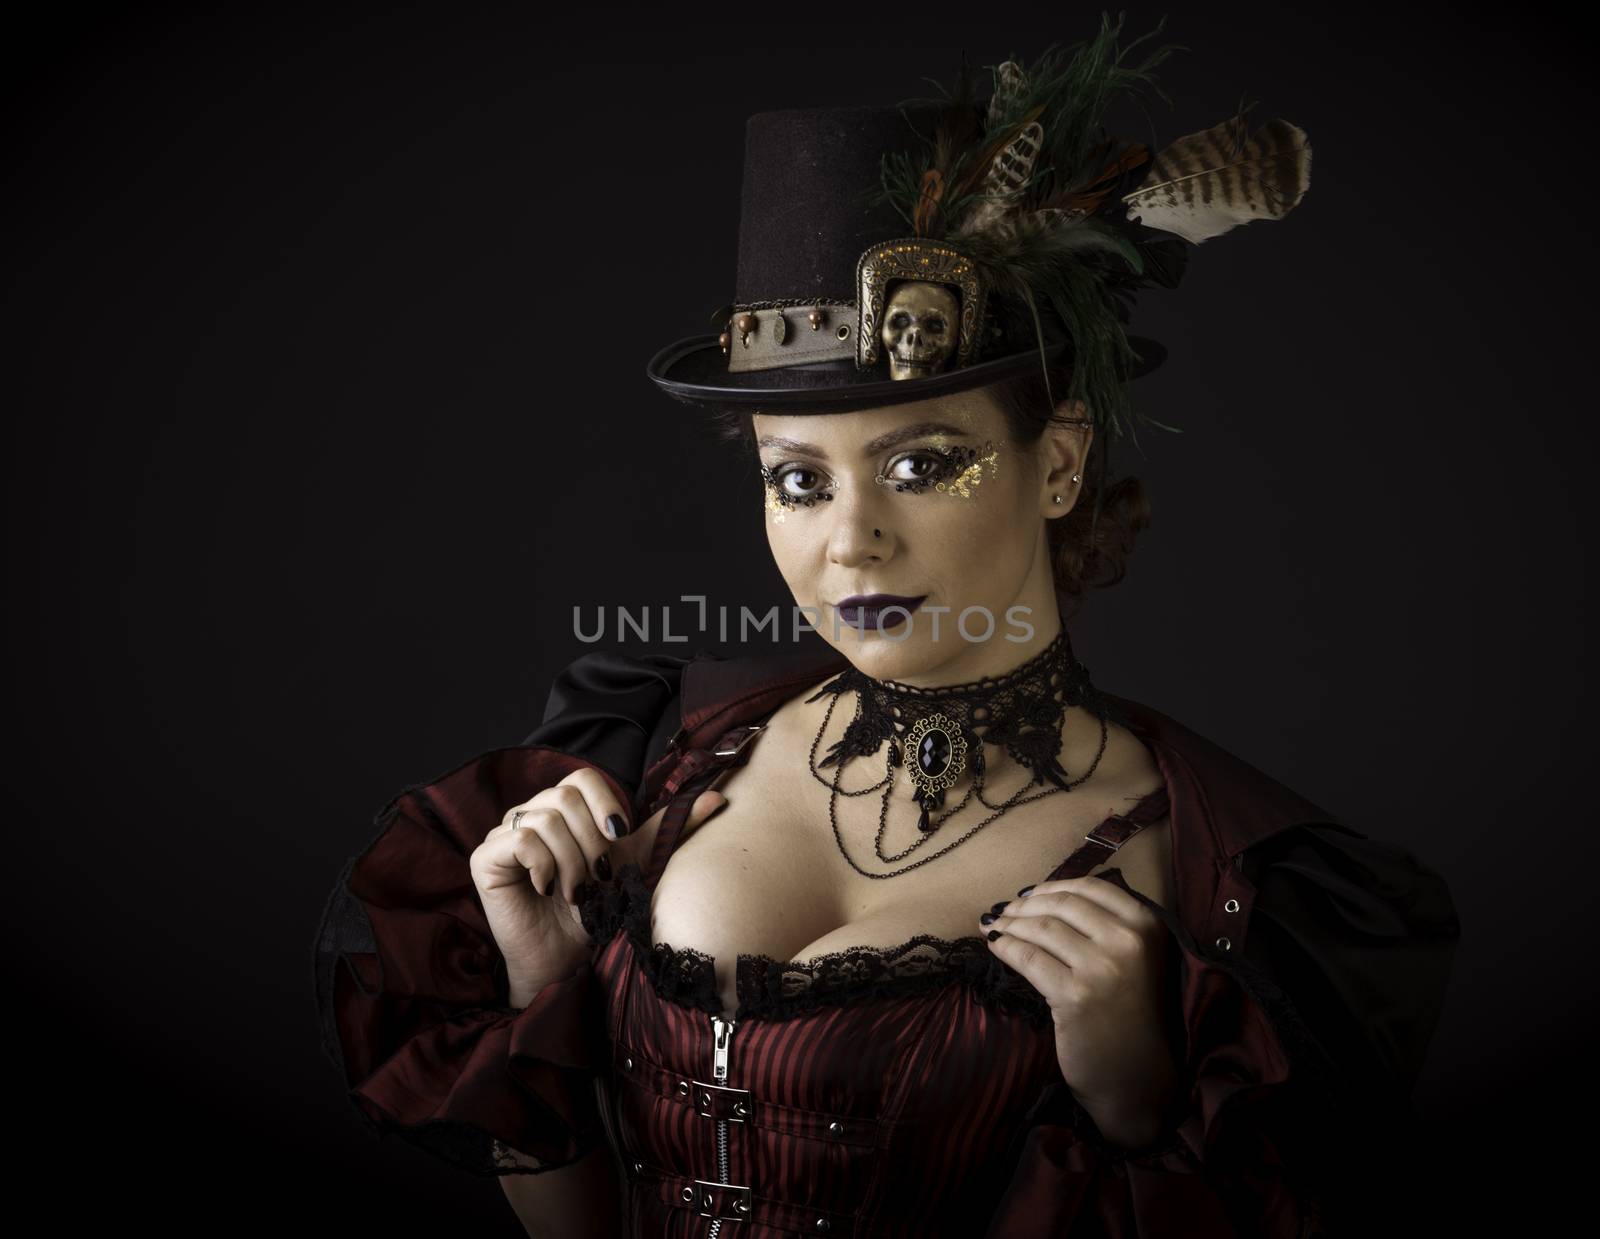 Emotional Portrait of Young Woman in Steampunk or Retro style. Studio shot. Model on a Black Background